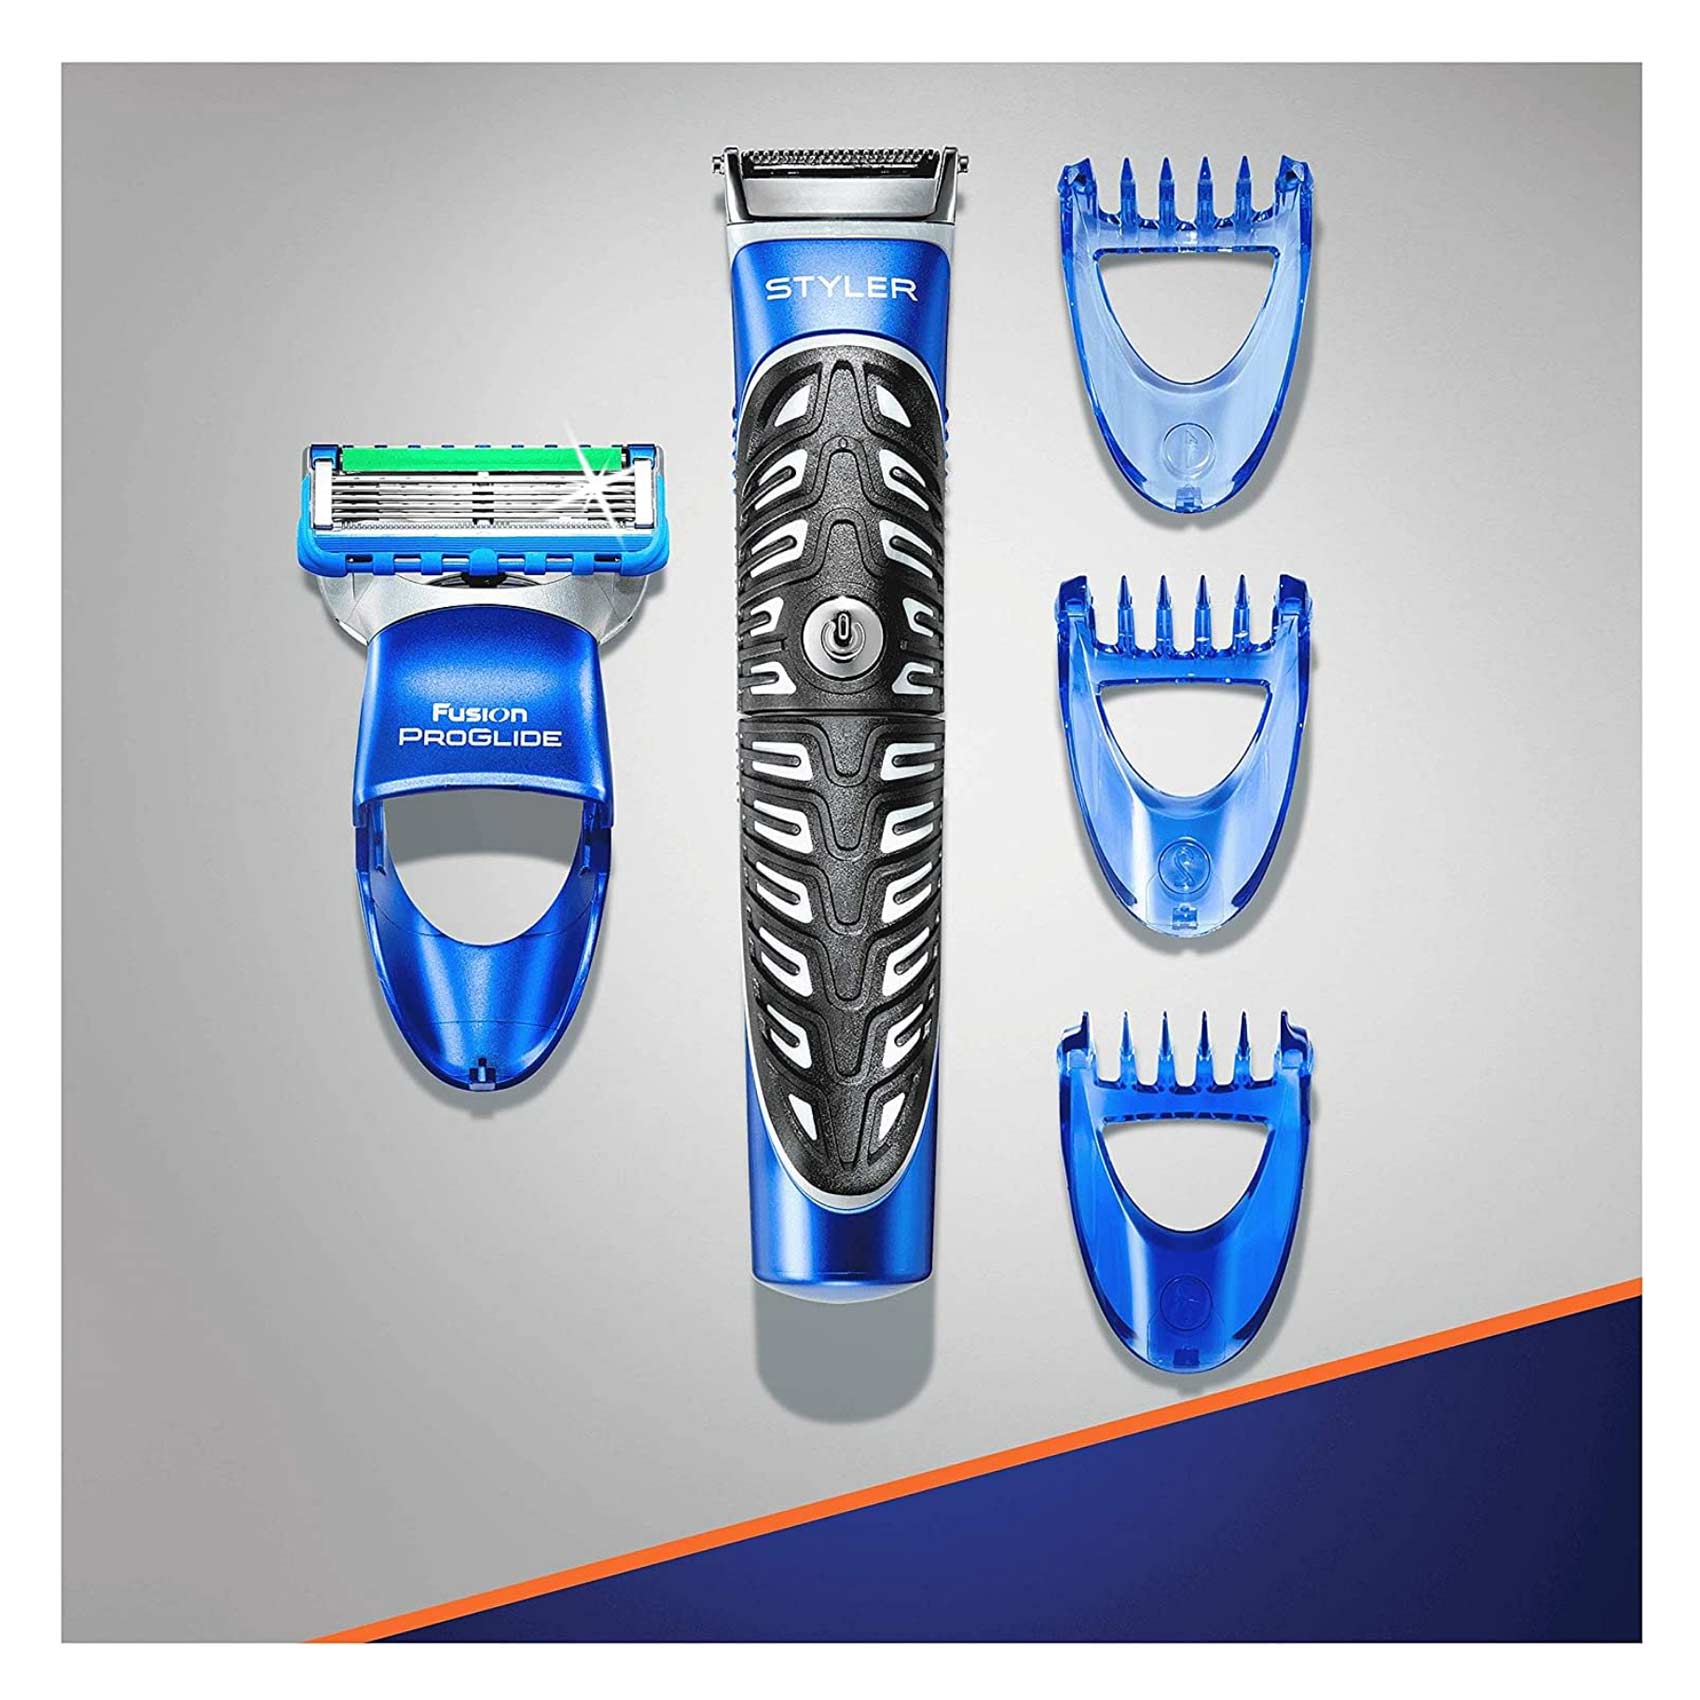 Gillette Fusion ProGlide Styler 3-in-1 Shaver Kit 6 Pieces